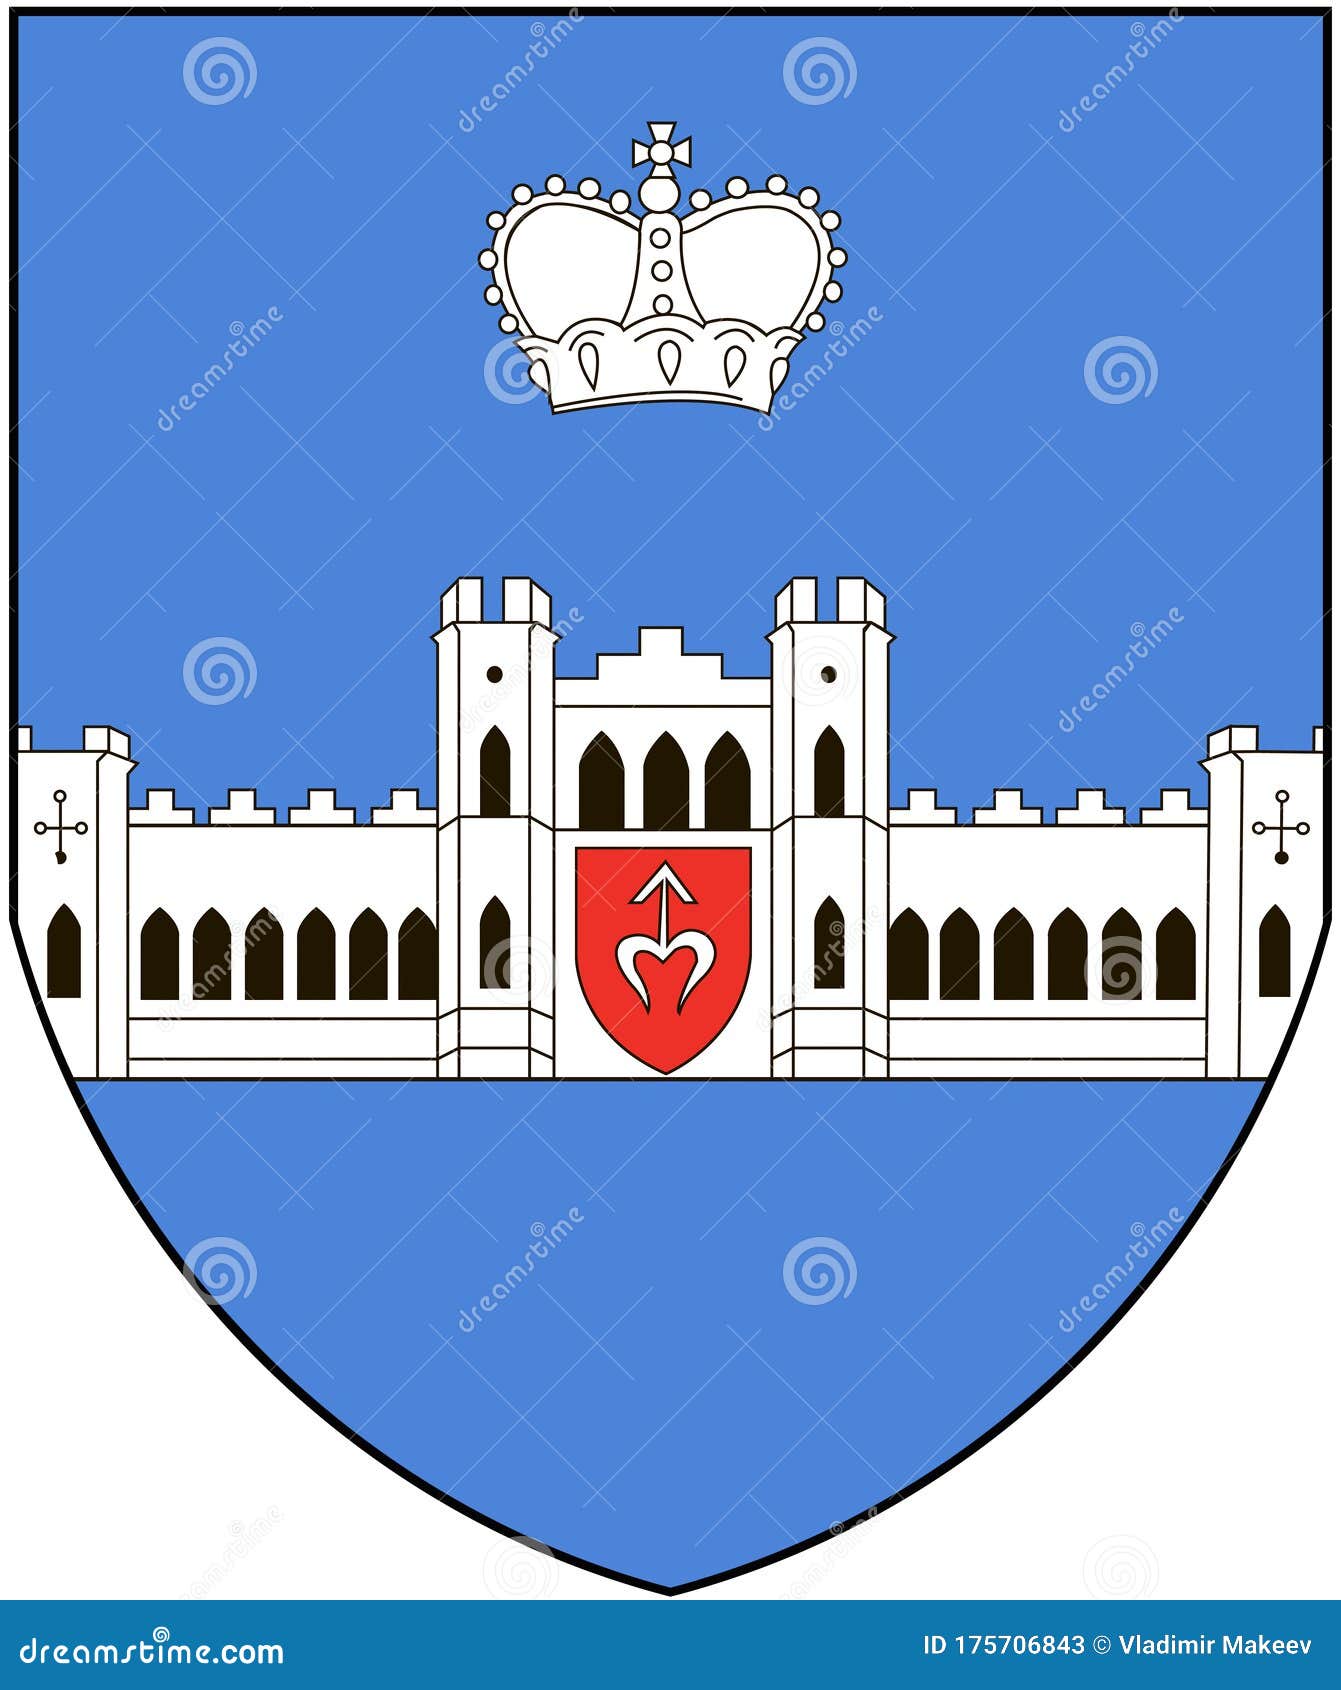 coat of arms of the city of kossovo. belarus